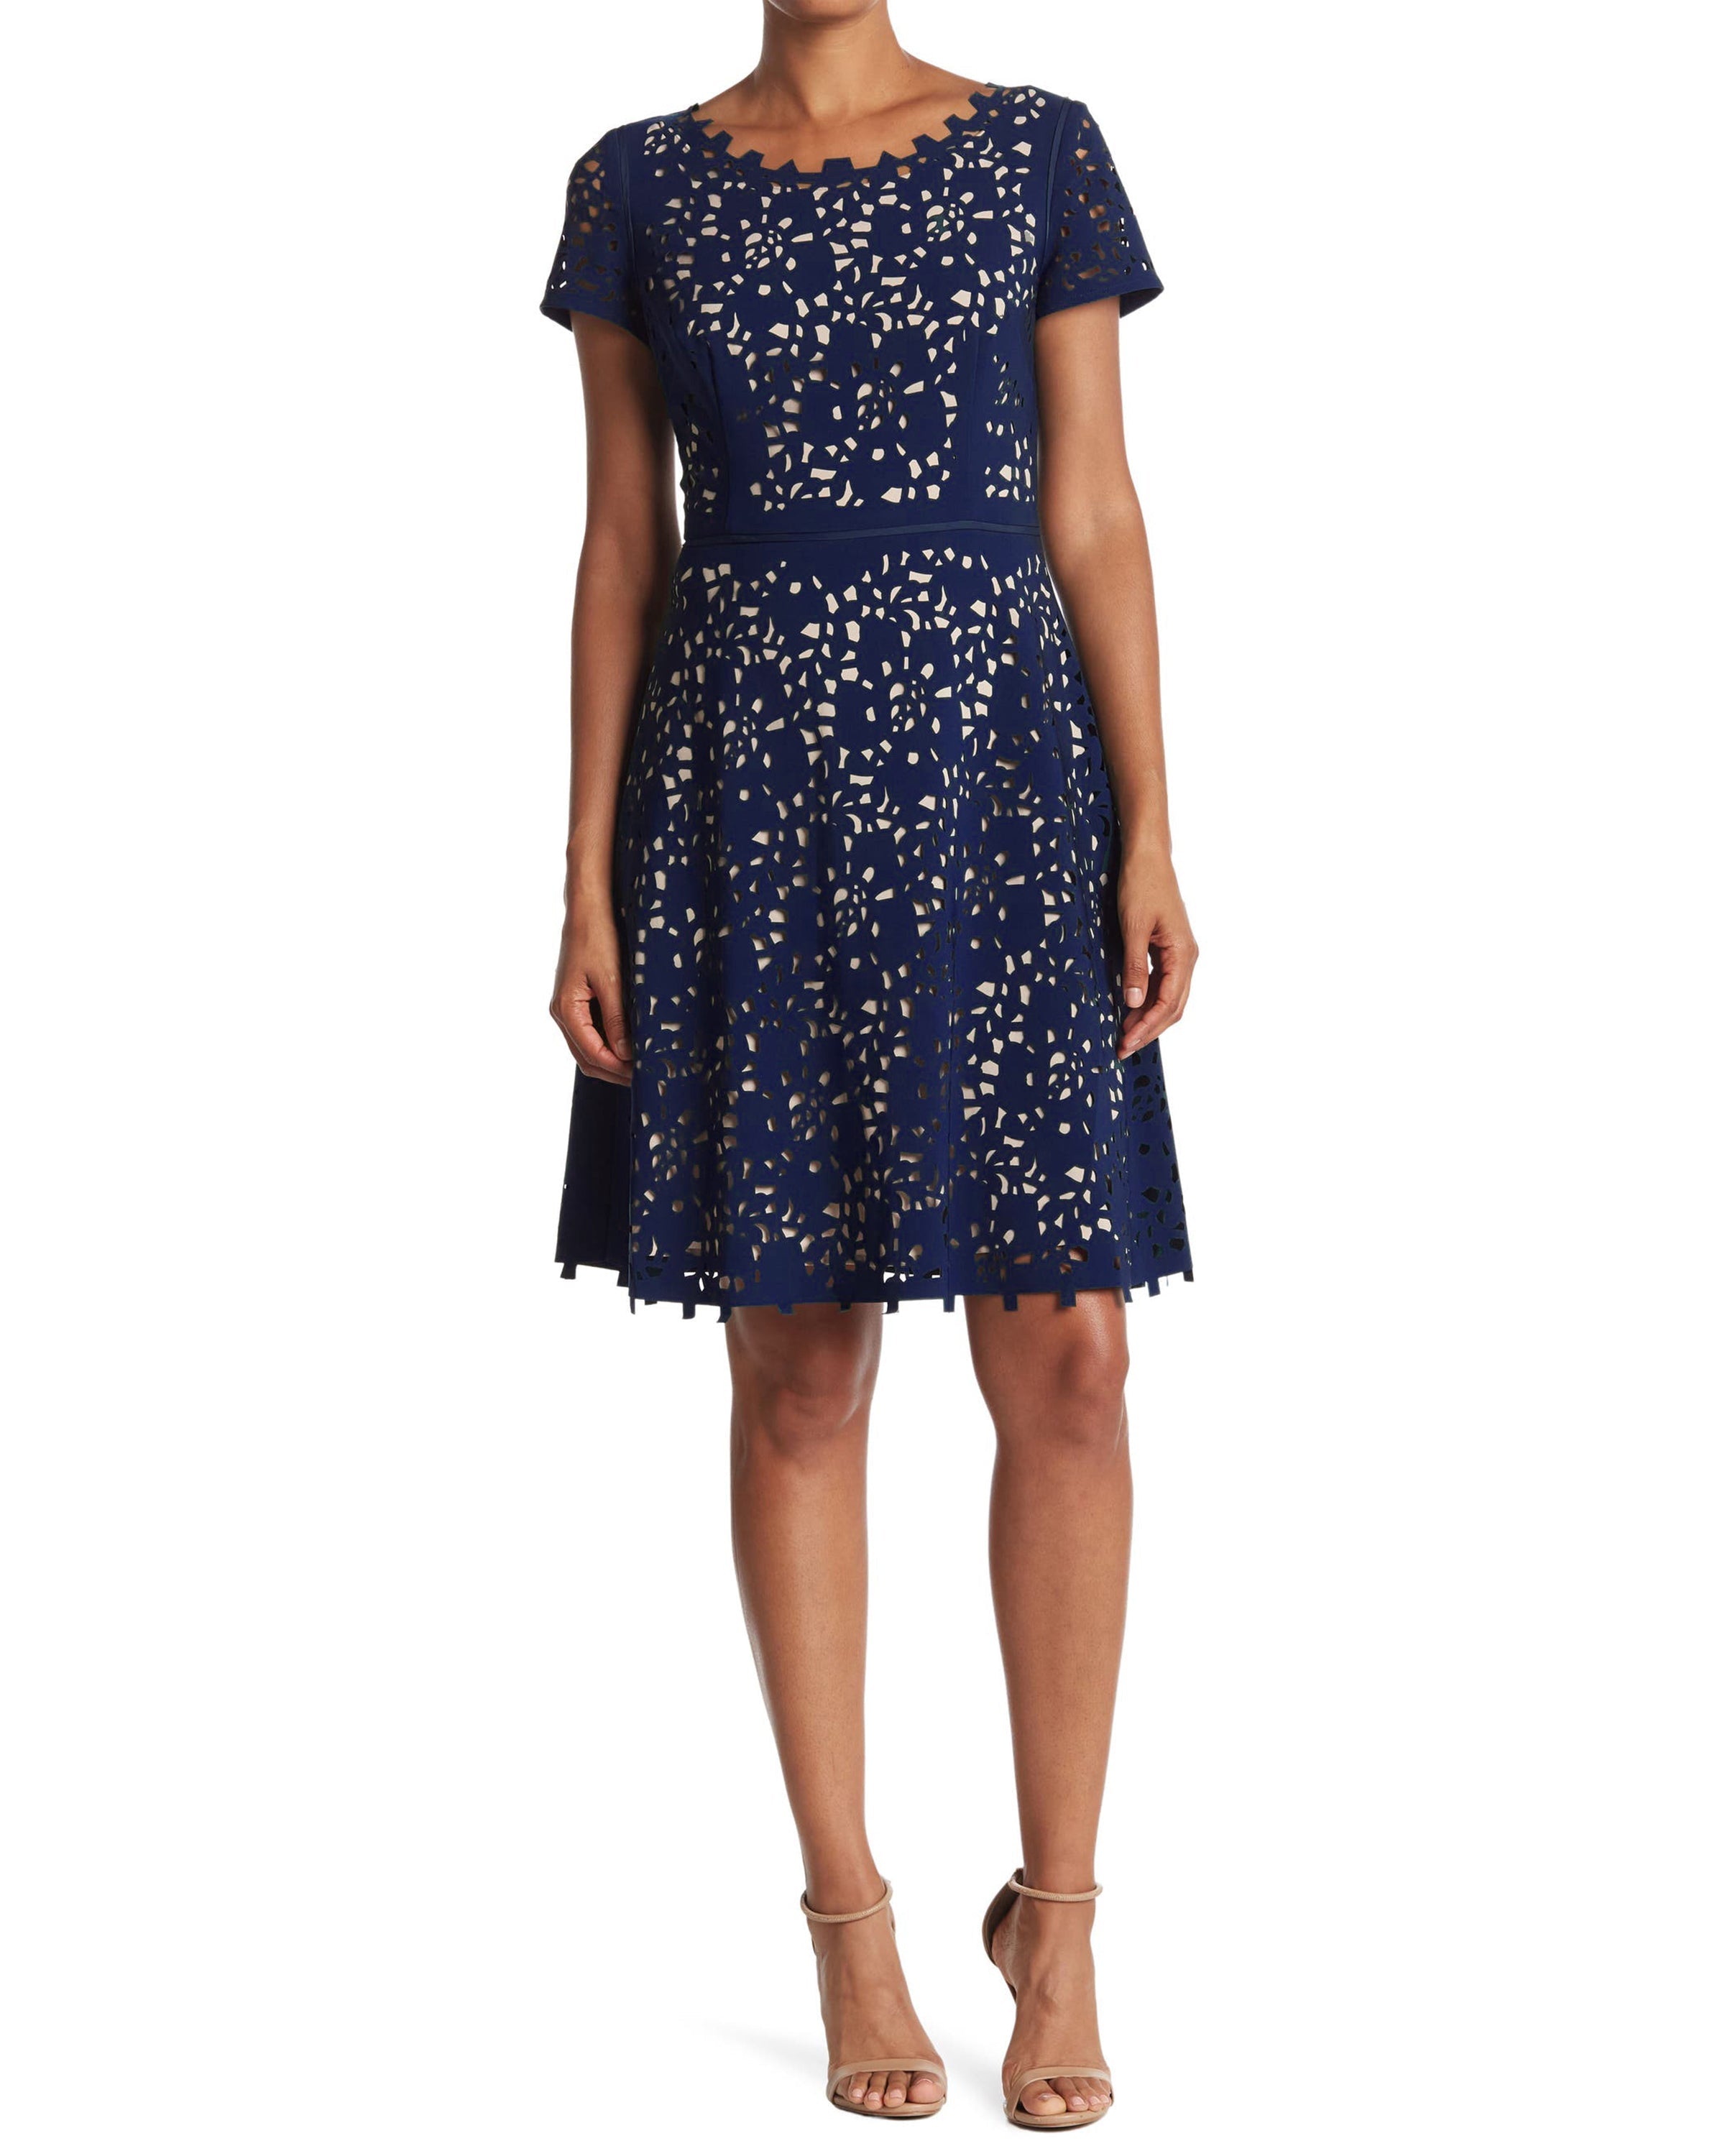 Buy HEY By Fbb Knife Pleated Fit & Flare Dress at Amazon.in